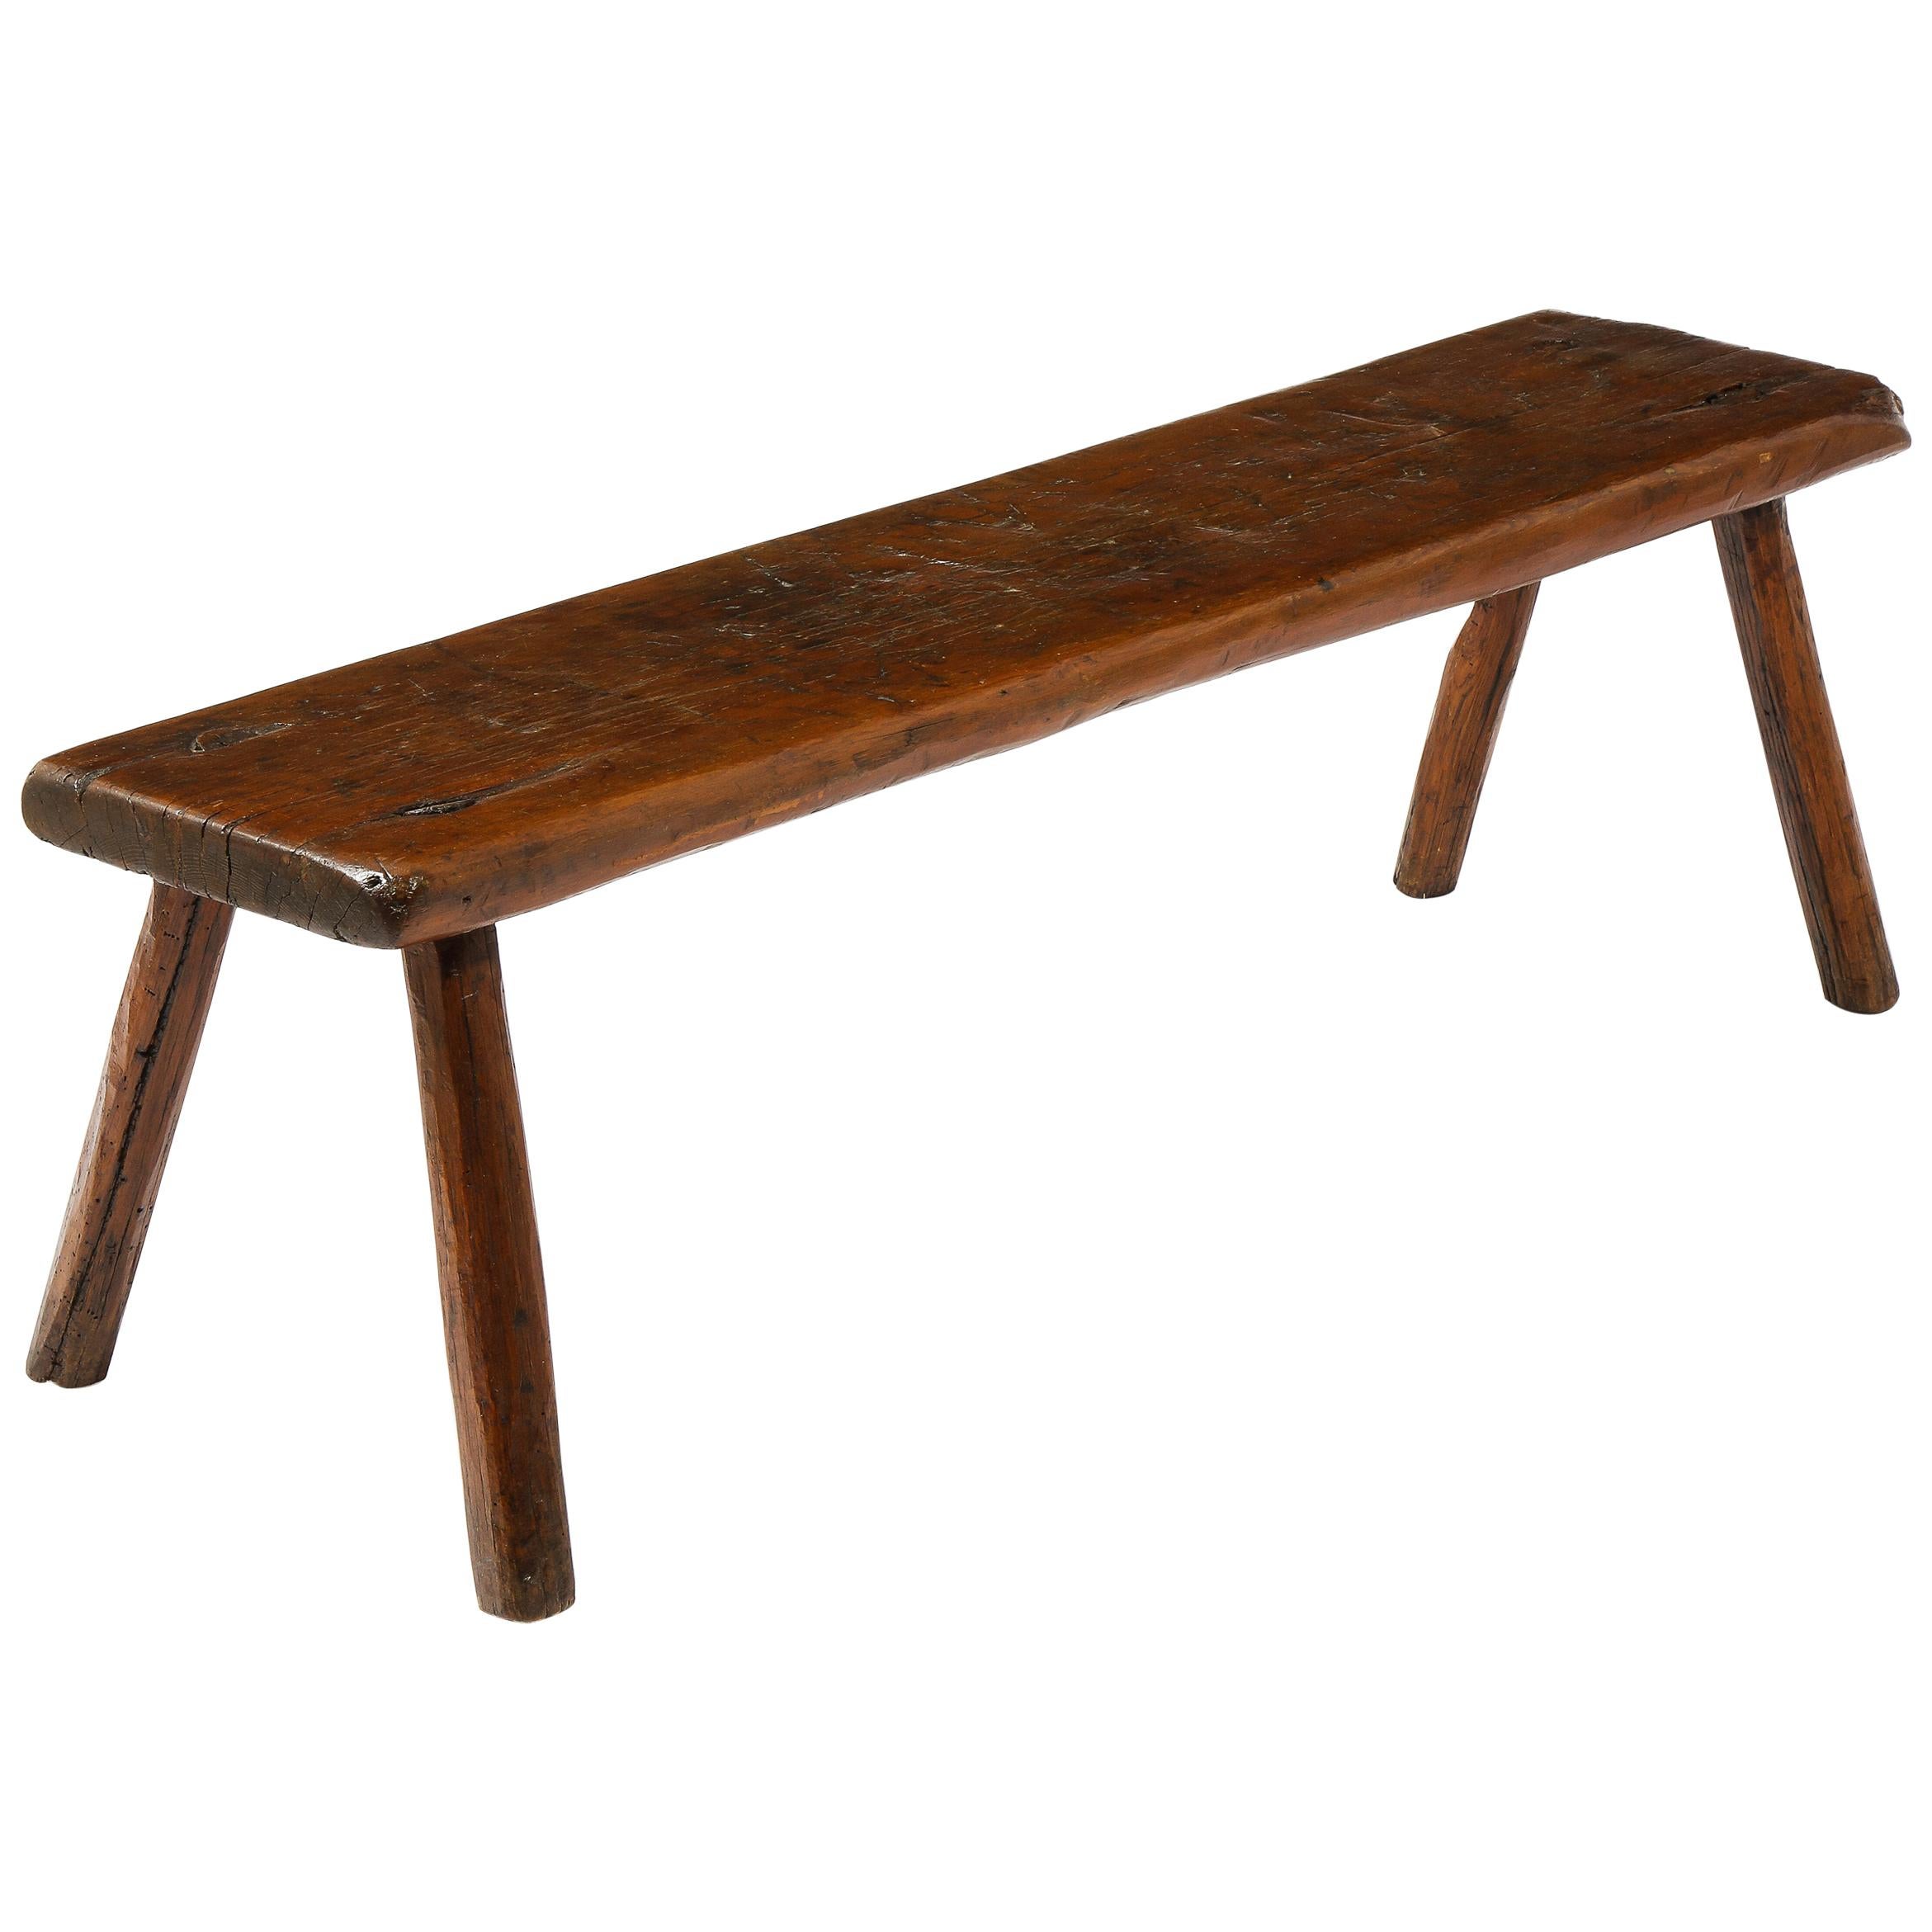 Large Rustic Oak Farm Bench or Coffee Table, USA 1920's